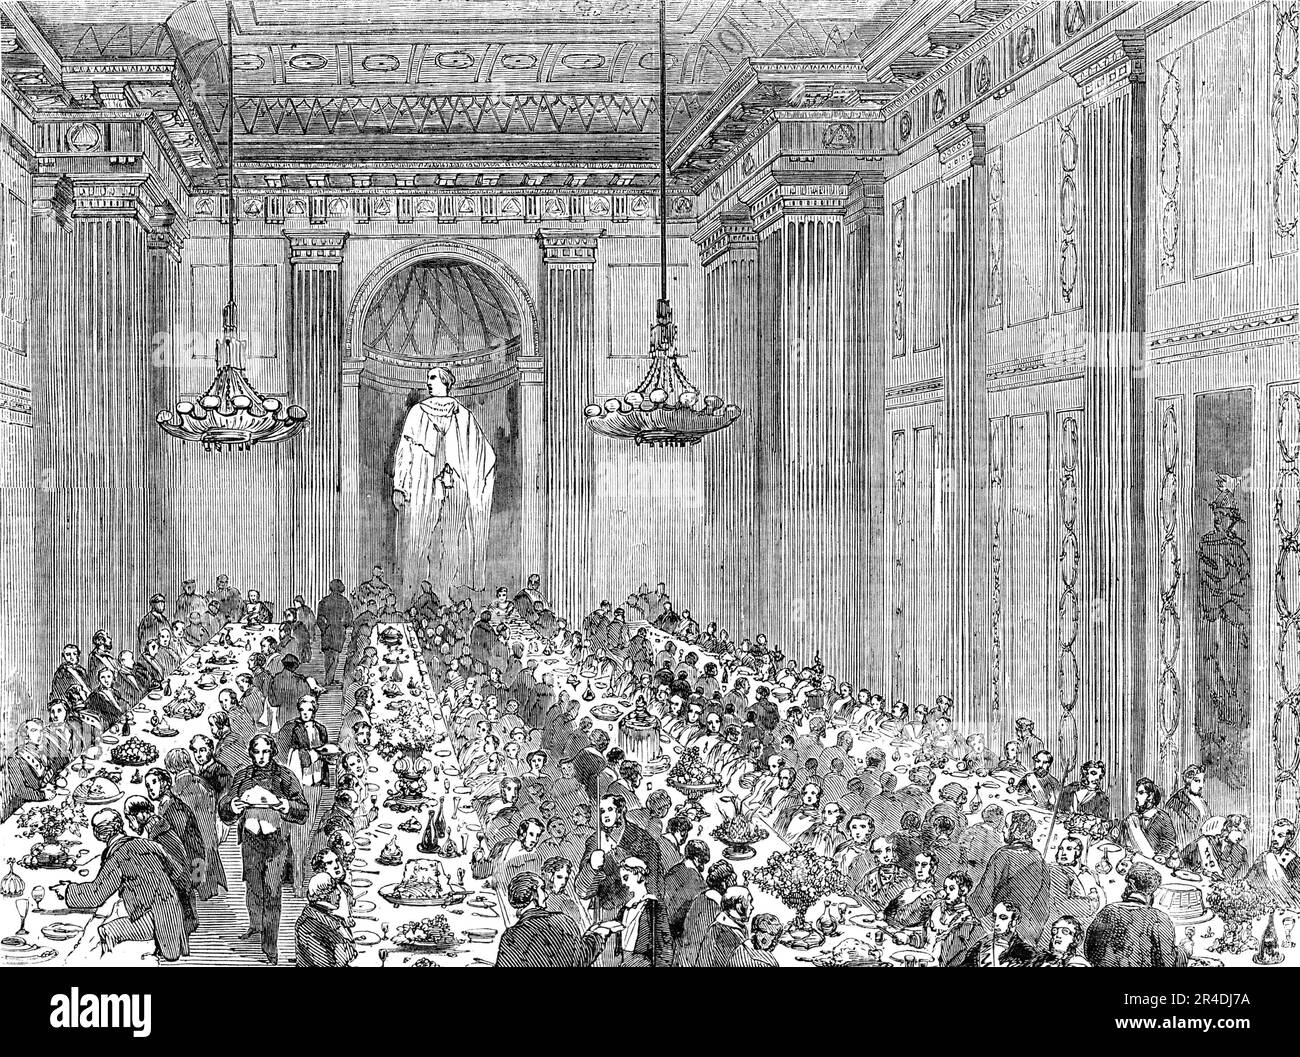 Anniversary Dinner of the Royal Masonic Institution for Boys, 1856. Masonic charity '...established in 1798 for the purpose of clothing, educating, and apprenticing the sons of indigent and deceased Freemasons...[View in Freemasons' Hall, London, at the] the moment when the boys were introduced to the Grand Master by the stewards...The tables were elegantly decorated with vases and candelabra, and the whole presented a very imposing spectacle; whilst the excellence of the viands did great credit to the establishment...the brethren were presided over by the M.W.G.M. the Earl of Zetland...Severa Stock Photo